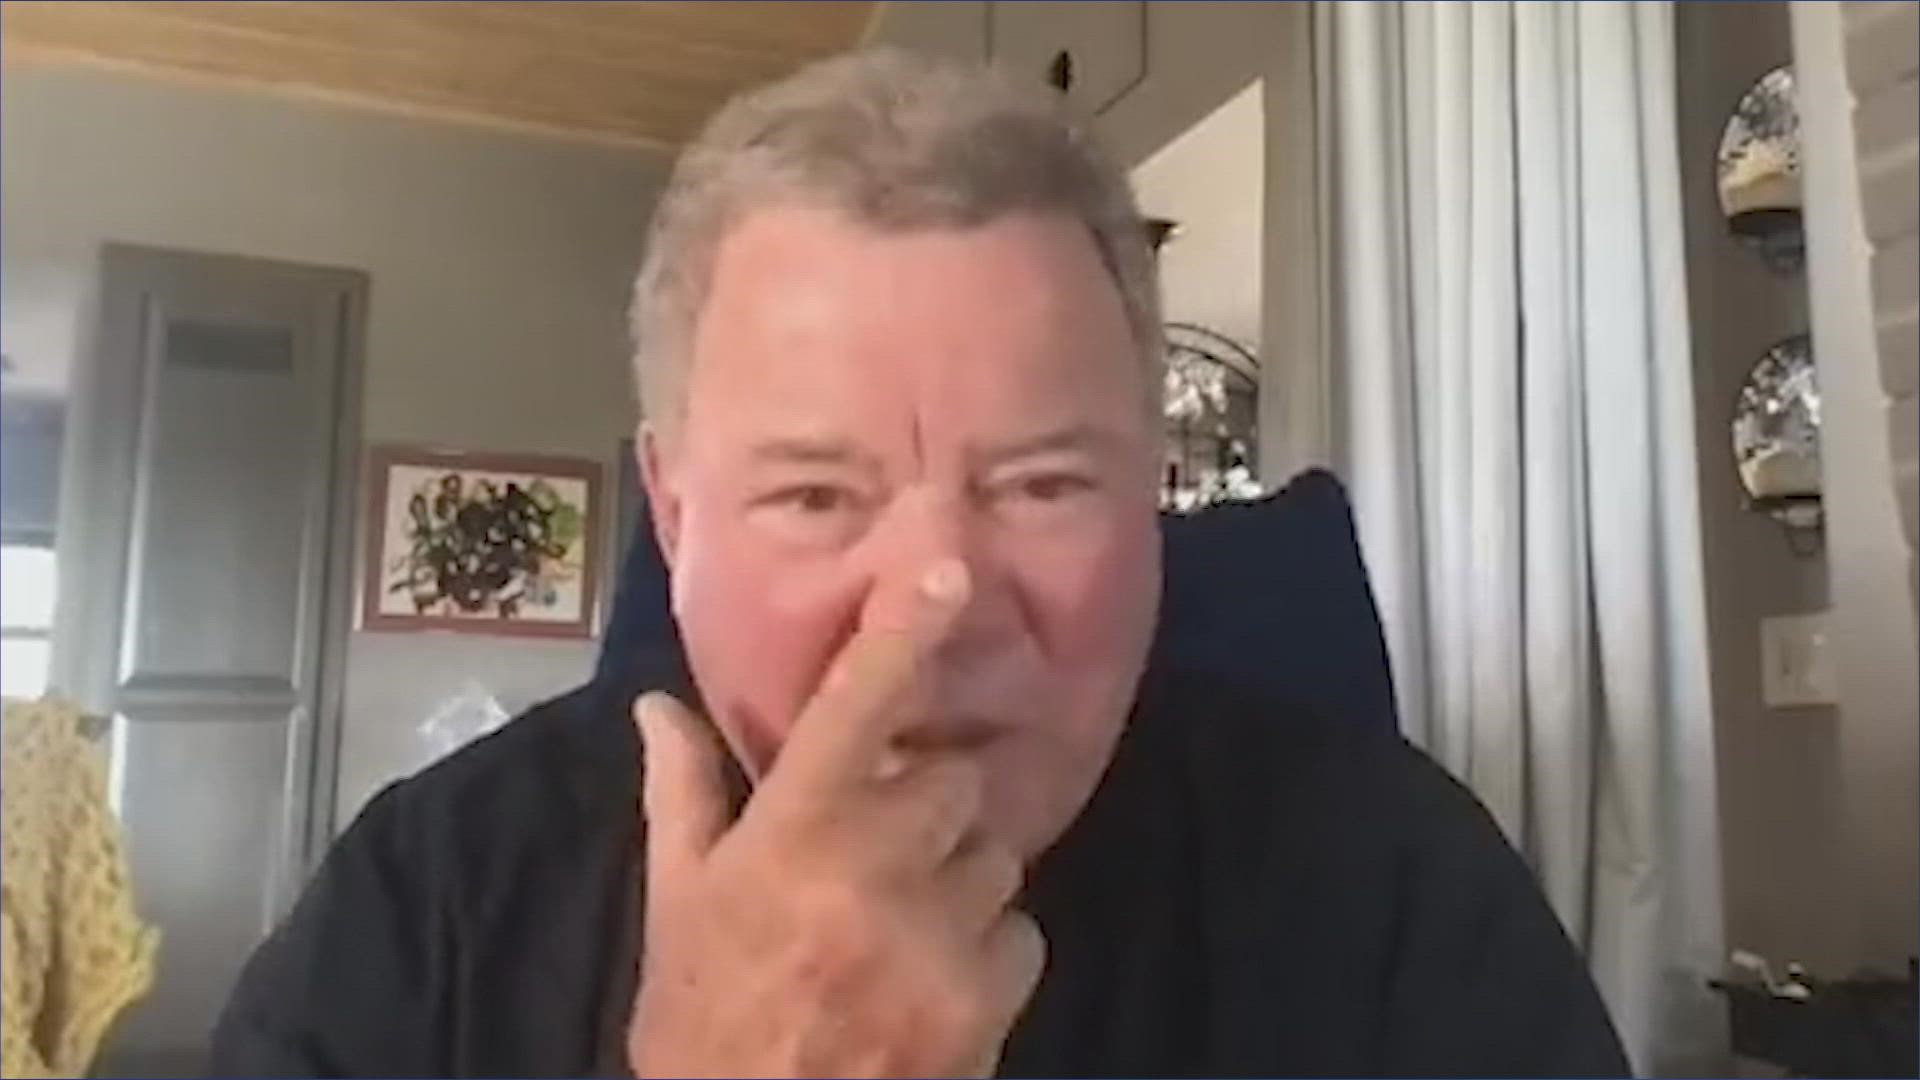 On Wednesday, William Shatner will boldly go where no 90-year-old man has gone before.